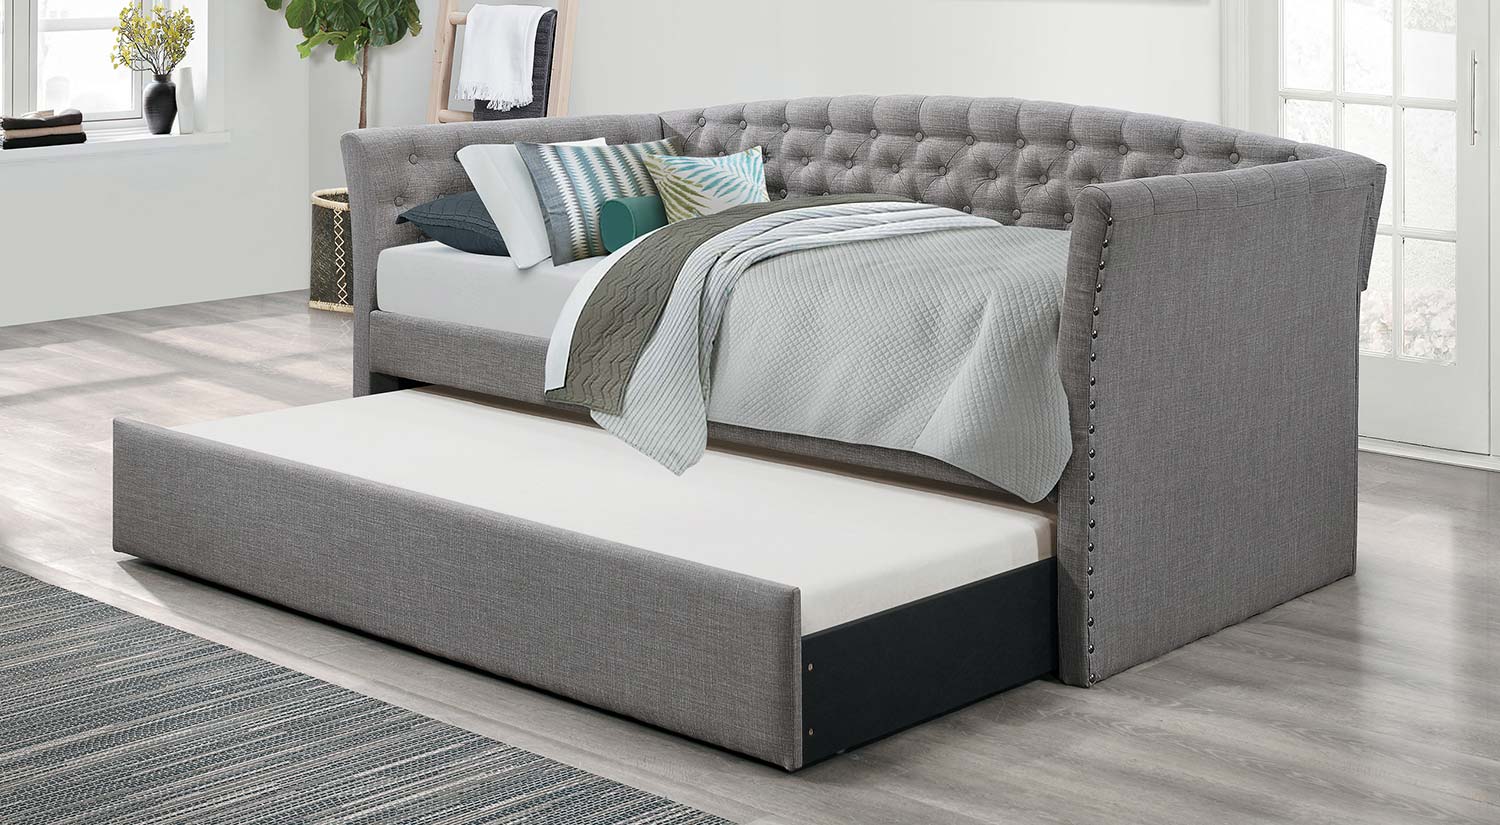 Homelegance Norwood Daybed with Trundle - Gray 4976 at Homelement.com